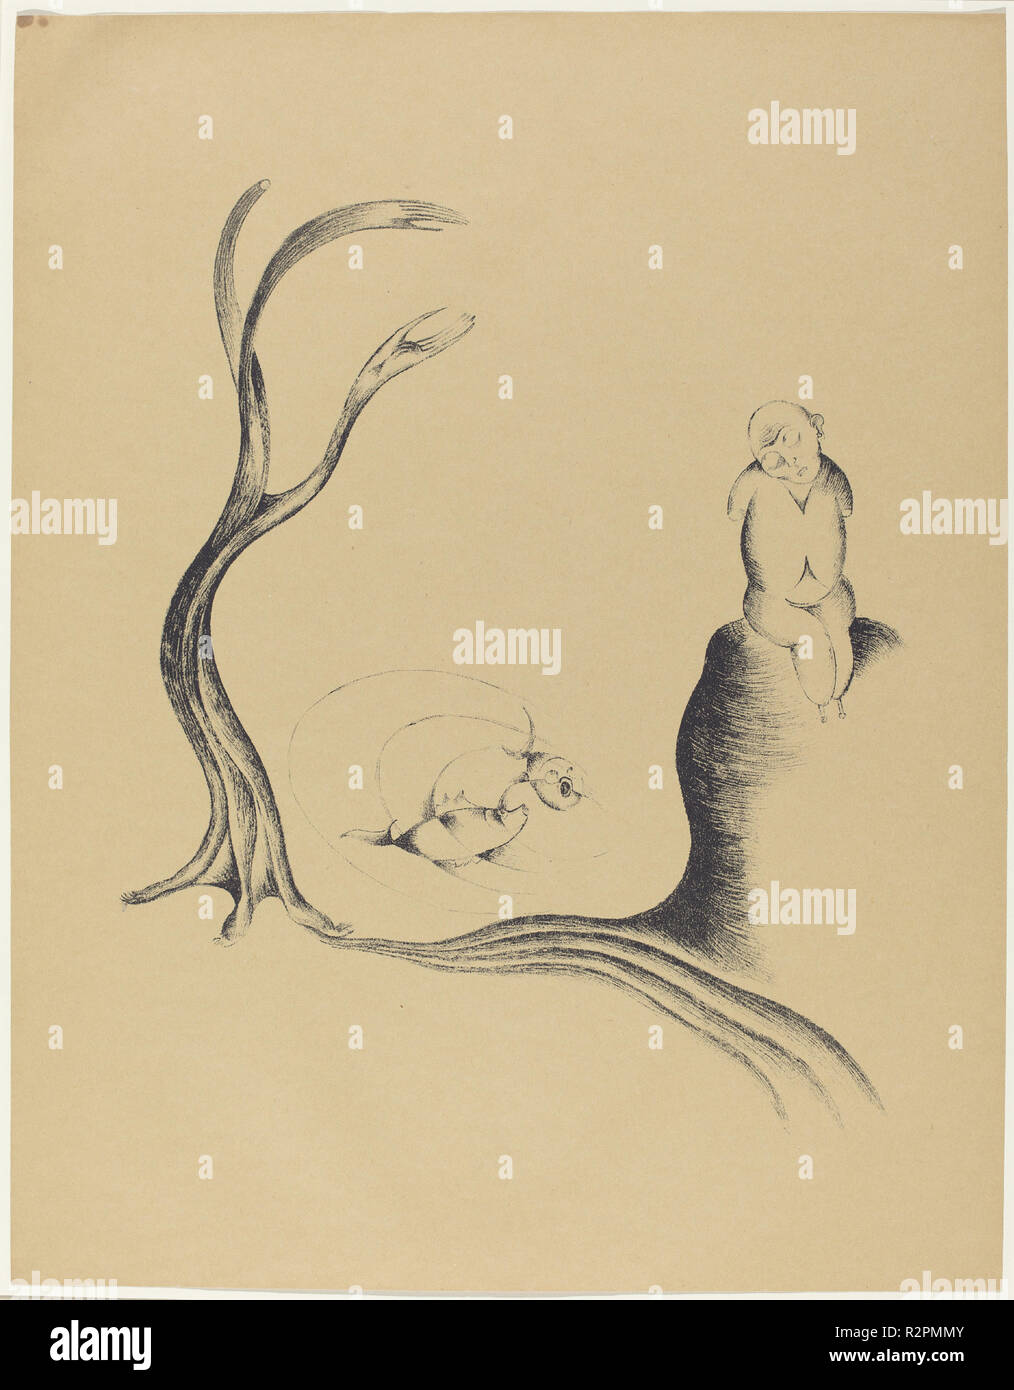 Der Baum der Sehnsucht (The Tree of Longing). Dated: 1920. Dimensions: overall: 59 x 46 cm (23 1/4 x 18 1/8 in.). Medium: lithograph on pale brown paper. Museum: National Gallery of Art, Washington DC. Author: Heinrich Hoerle. Stock Photo